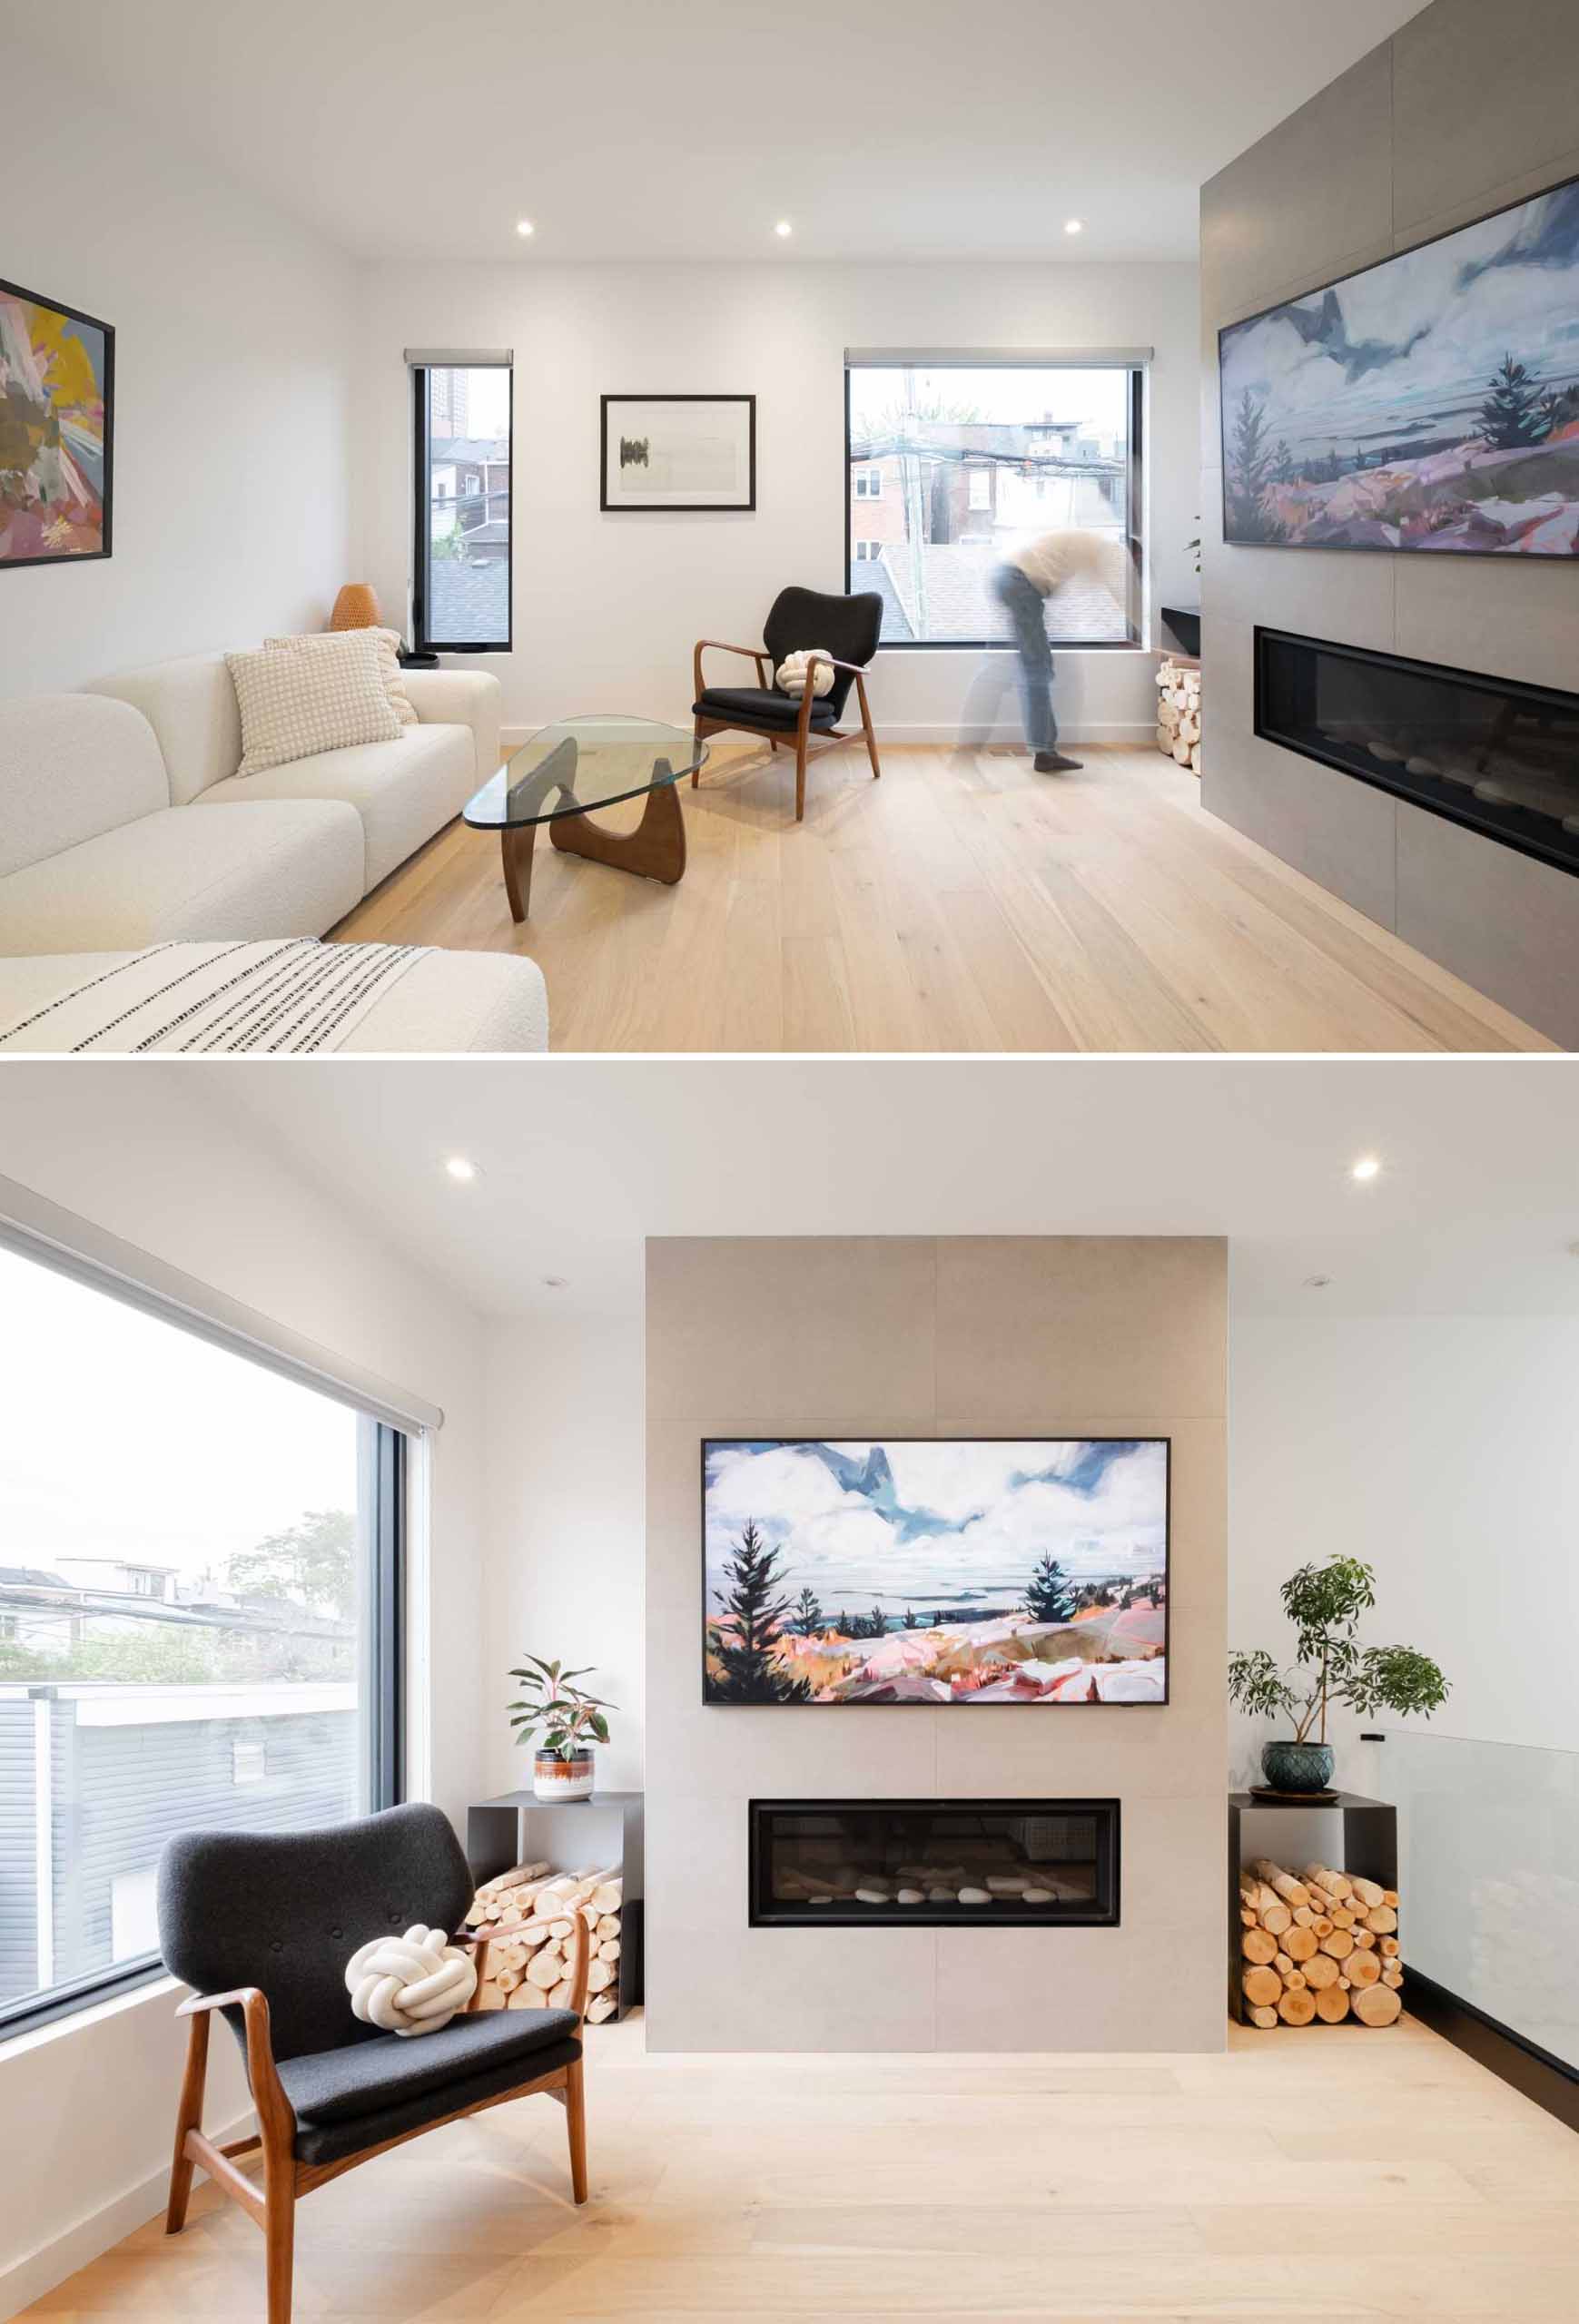 A two-storey laneway house with a small living room that has a fireplace.